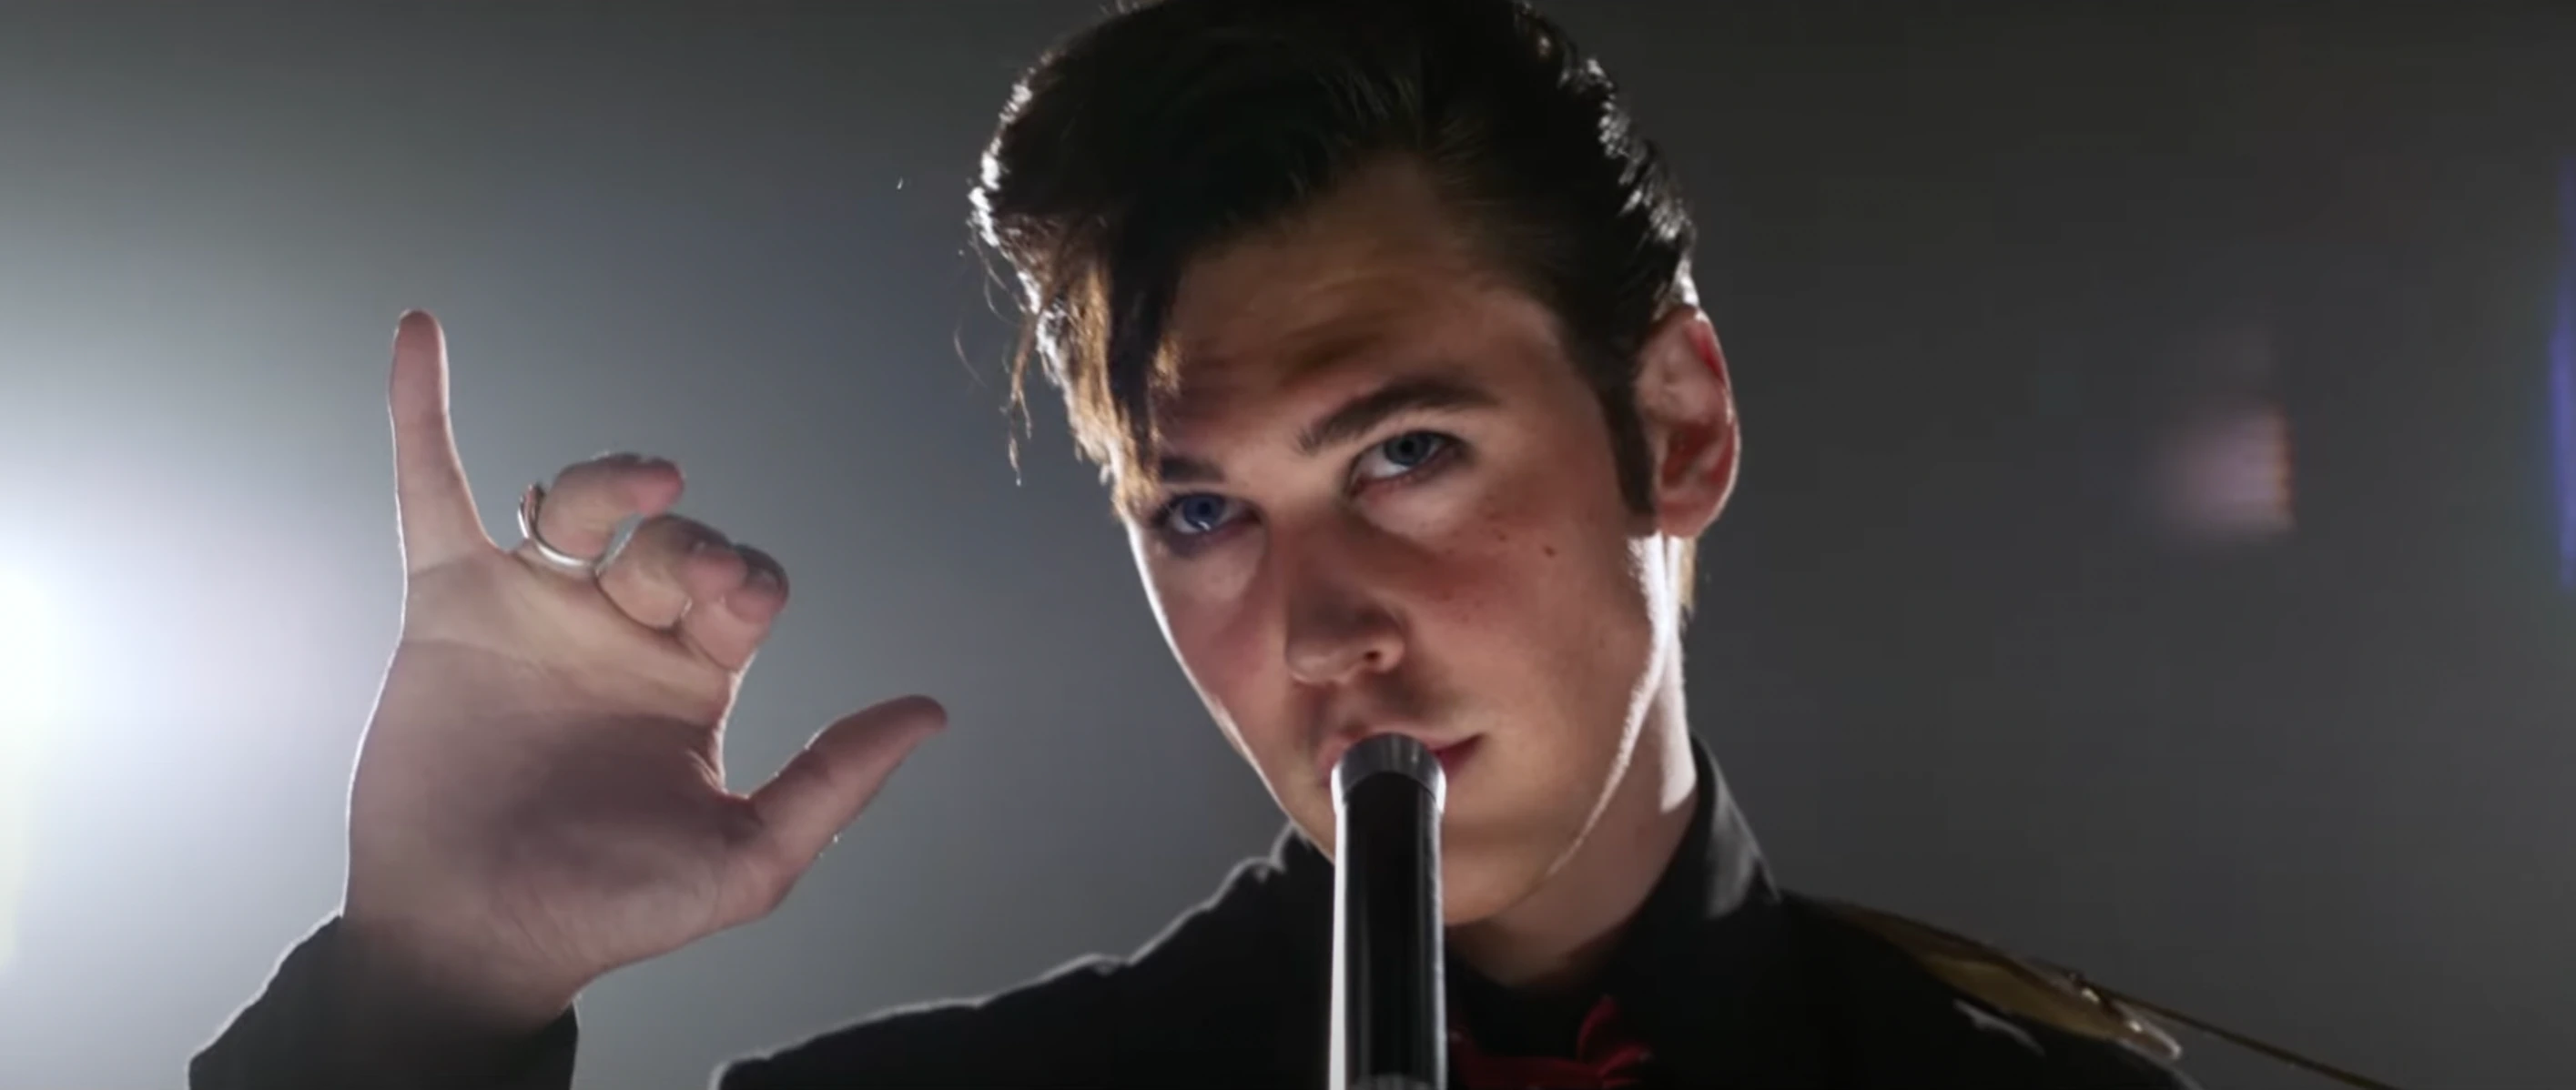 New ‘Elvis’ Trailer Traces The King of Rock & Roll’s Ascent To Musical Godhood